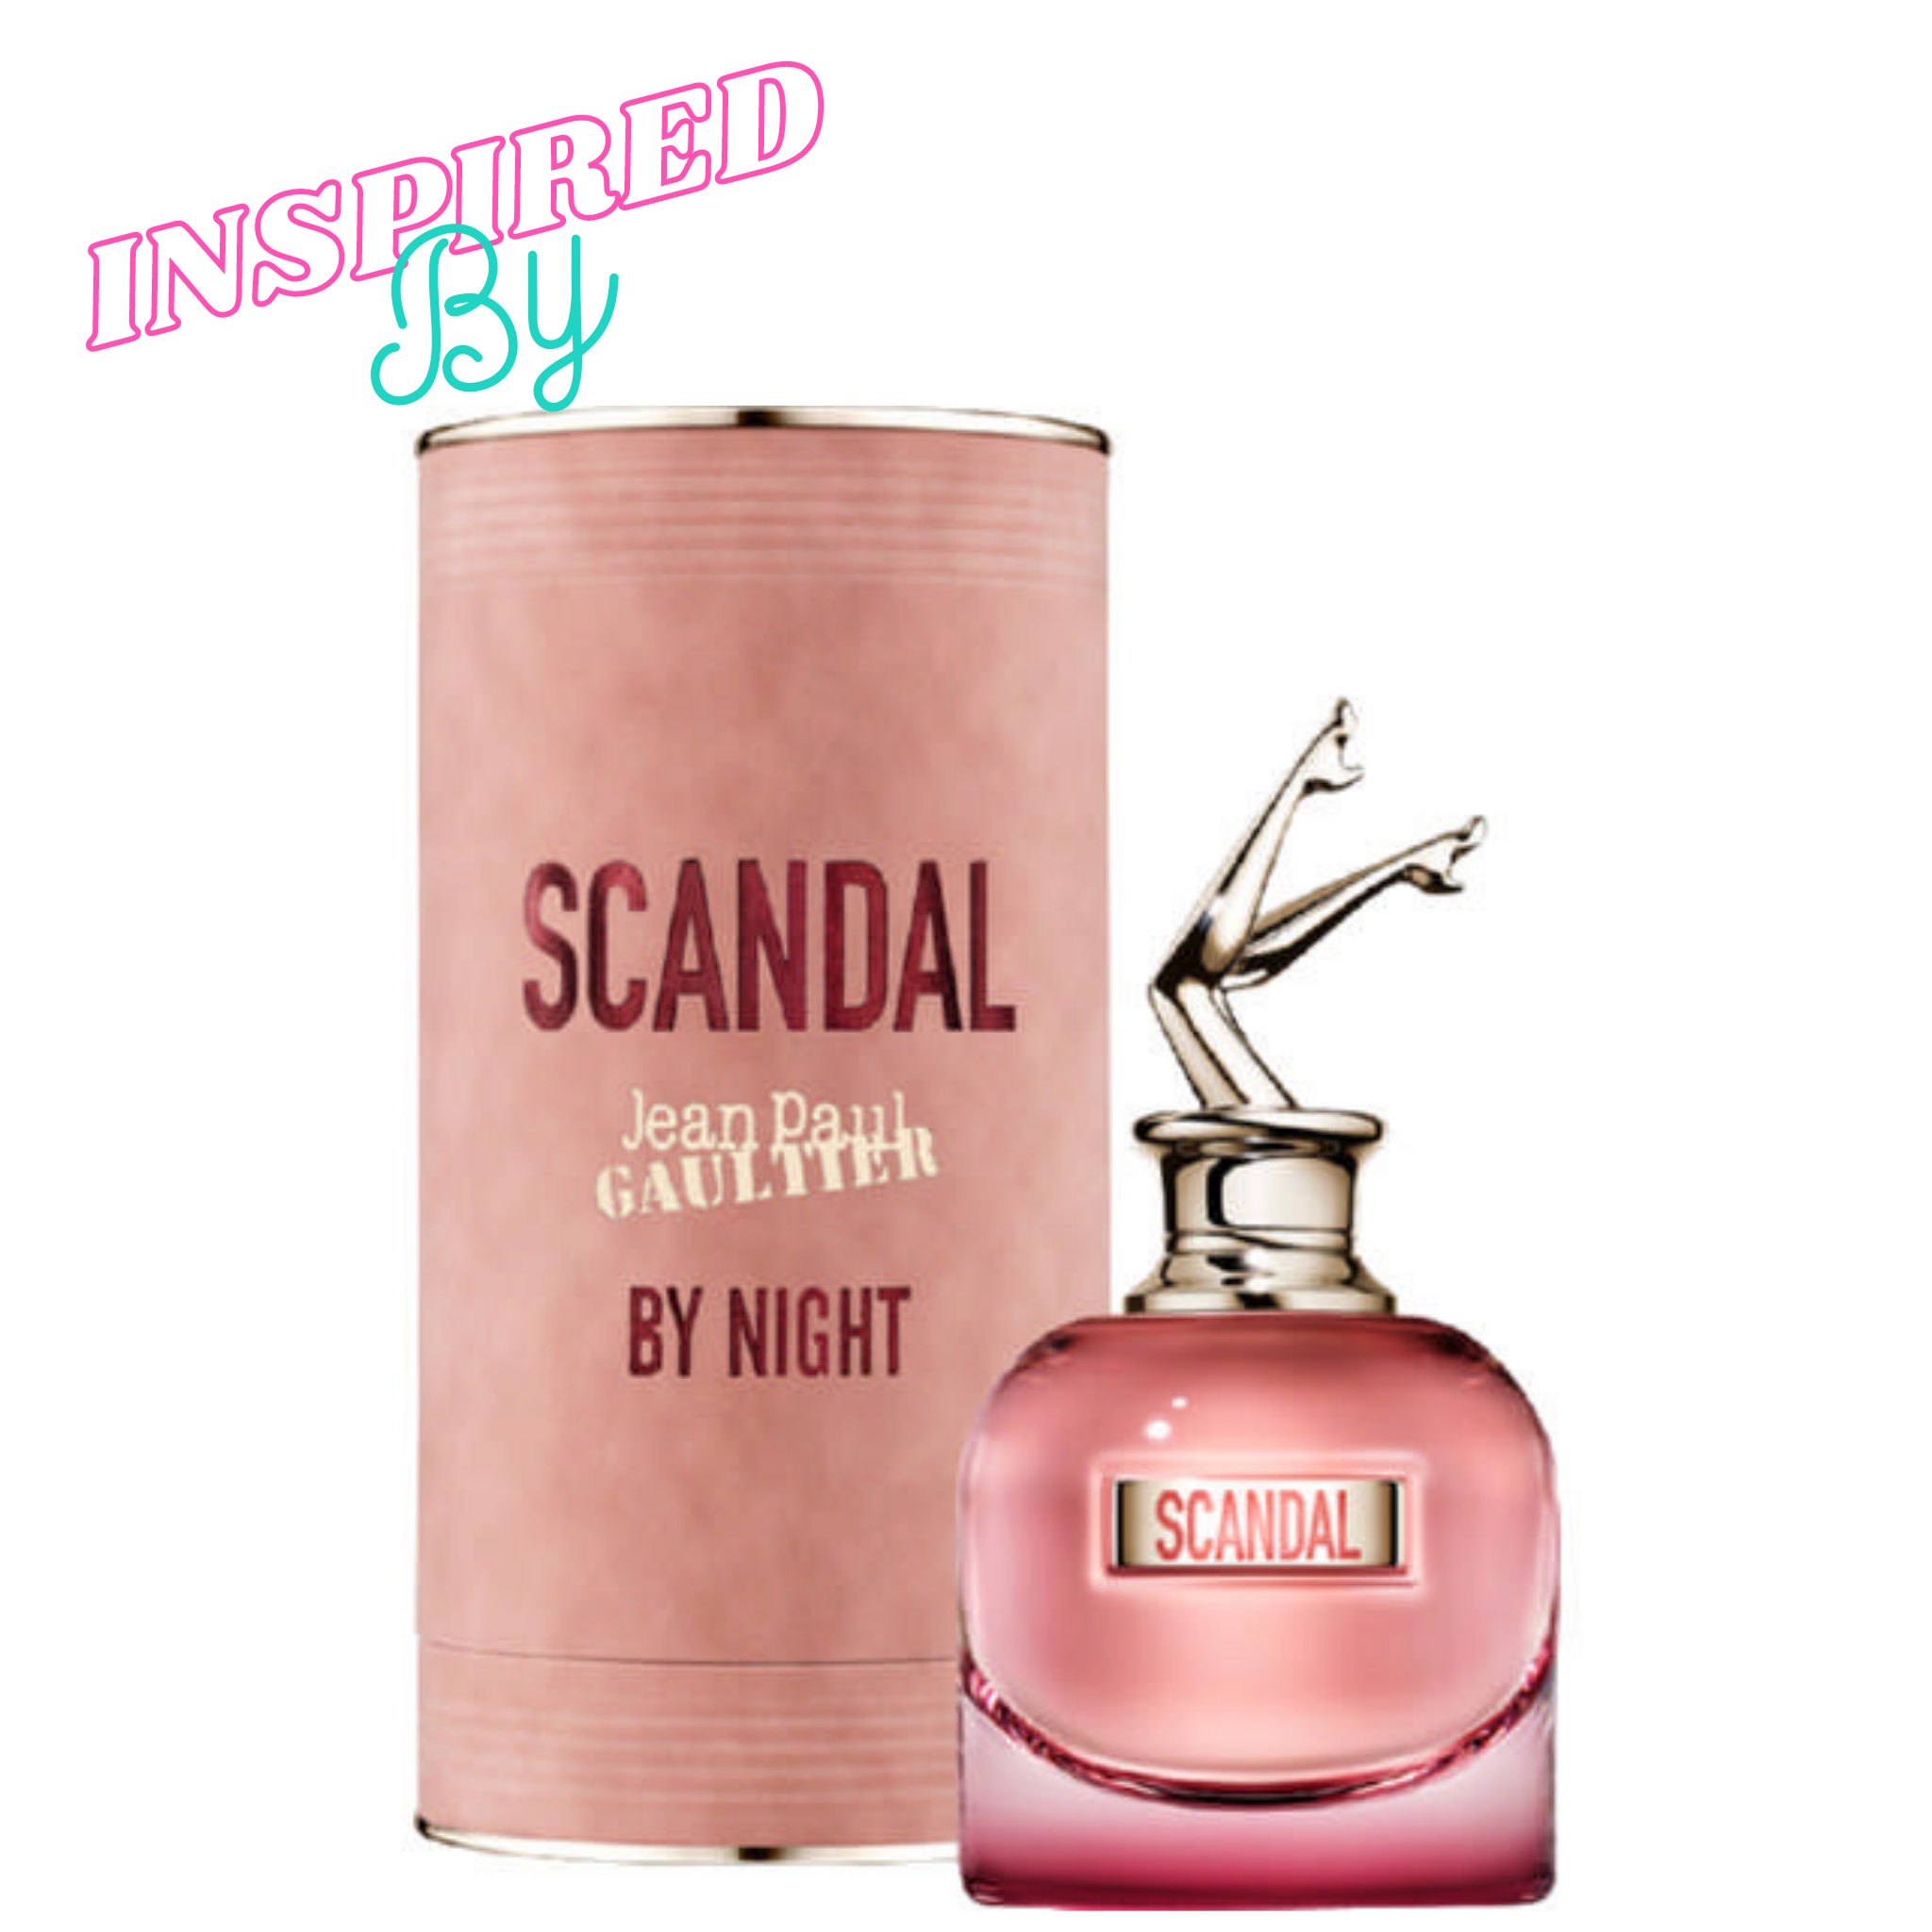 Inspired by JPG Scandal by Night 100ml - Fragrance Deliver SA